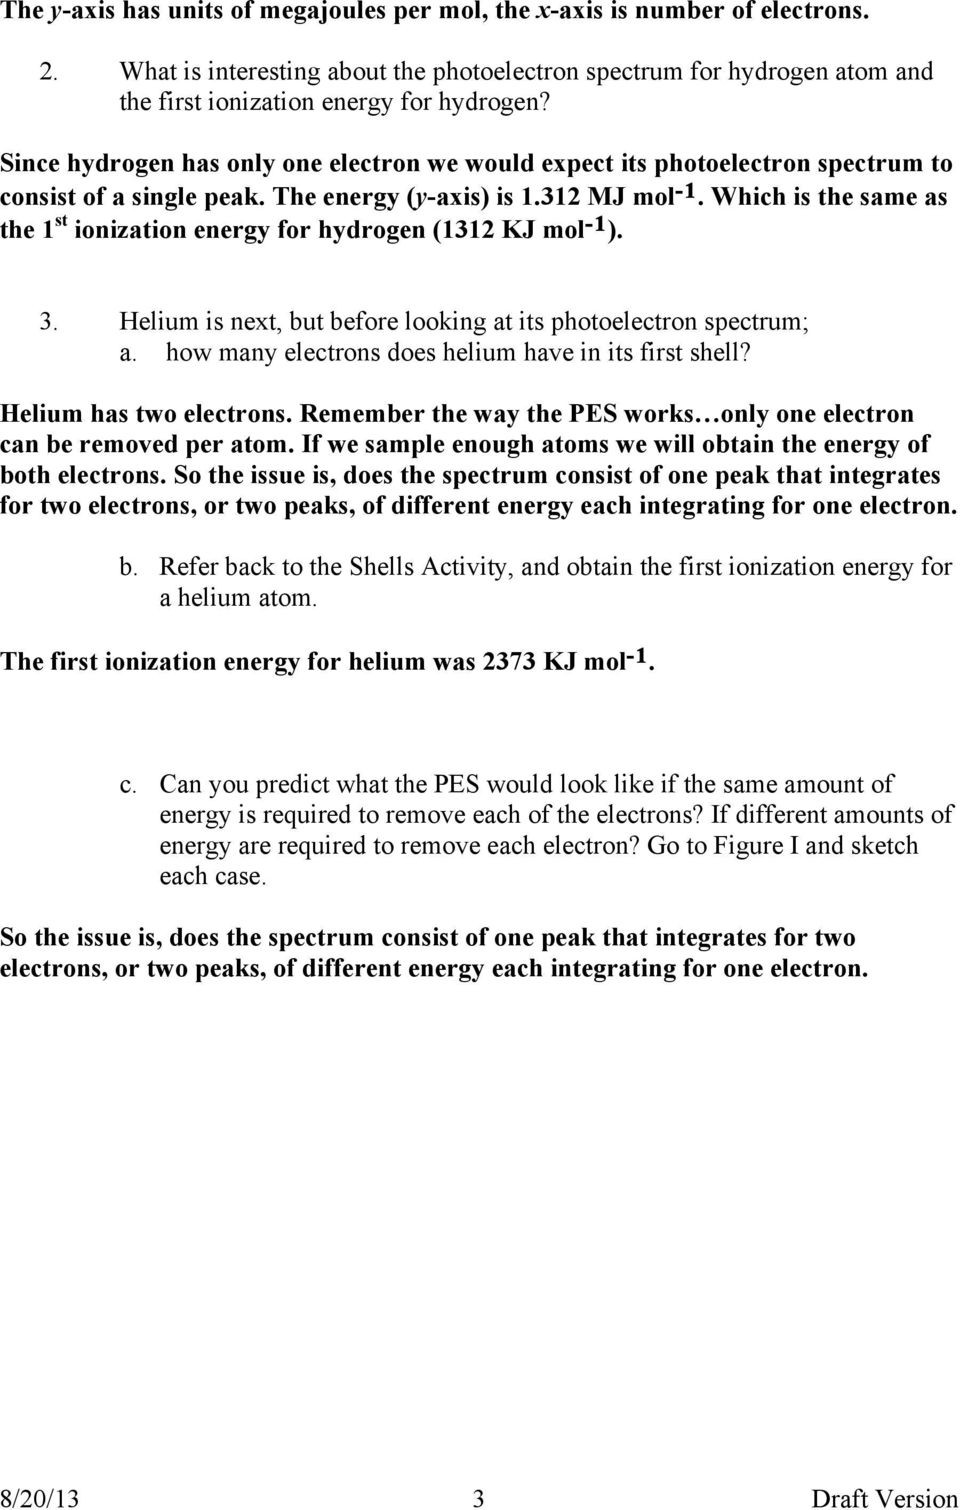 Photoelectron Spectroscopy Worksheet Answers Question Do All Electrons In the Same Level Have the Same